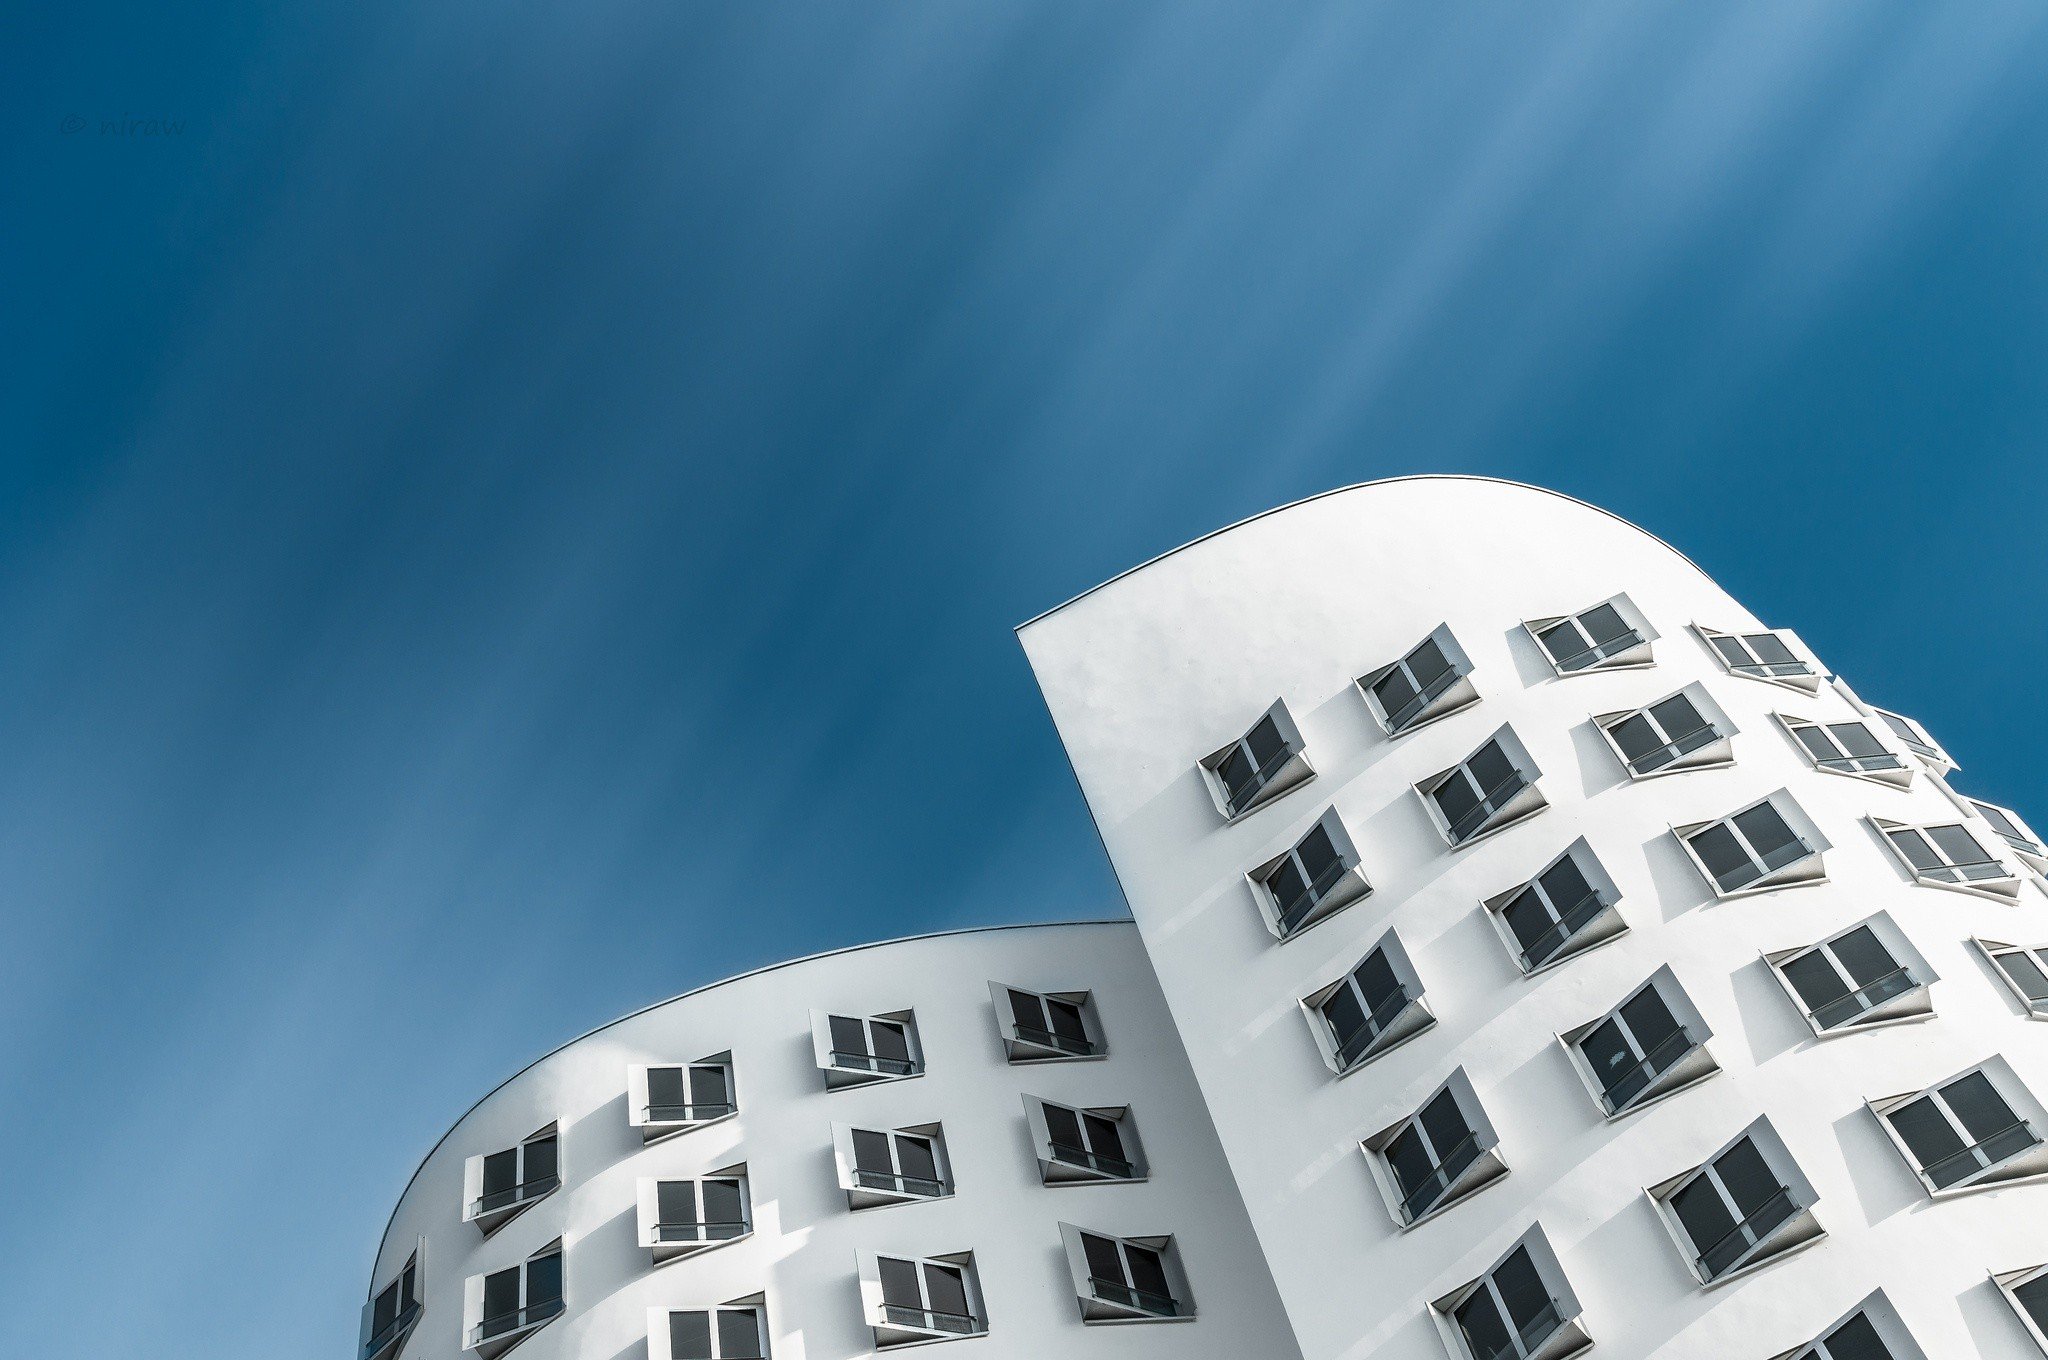 Düsseldorf, Architecture, Germany, Gehry House, Building, Worms eye view, Sky Wallpaper